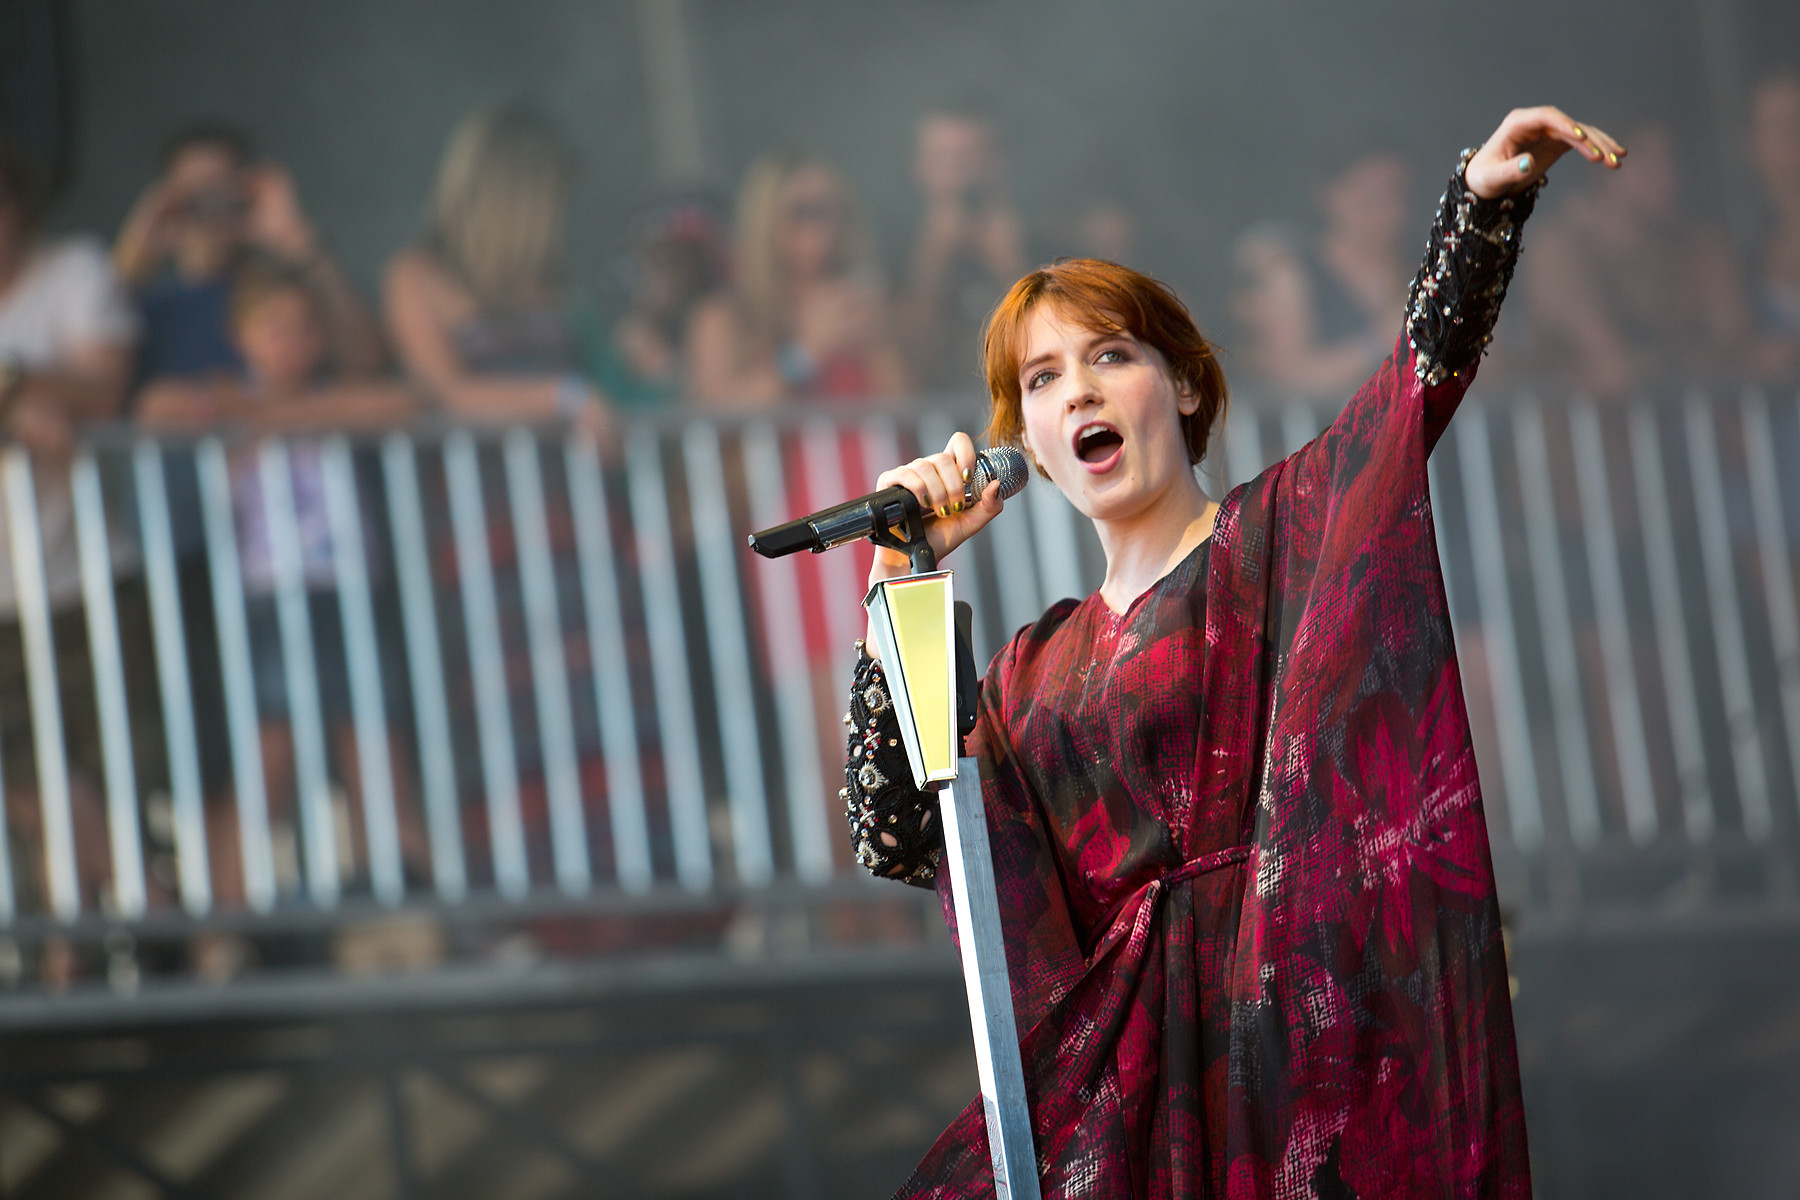 Florence and The Machine @ Lollapalooza 2012